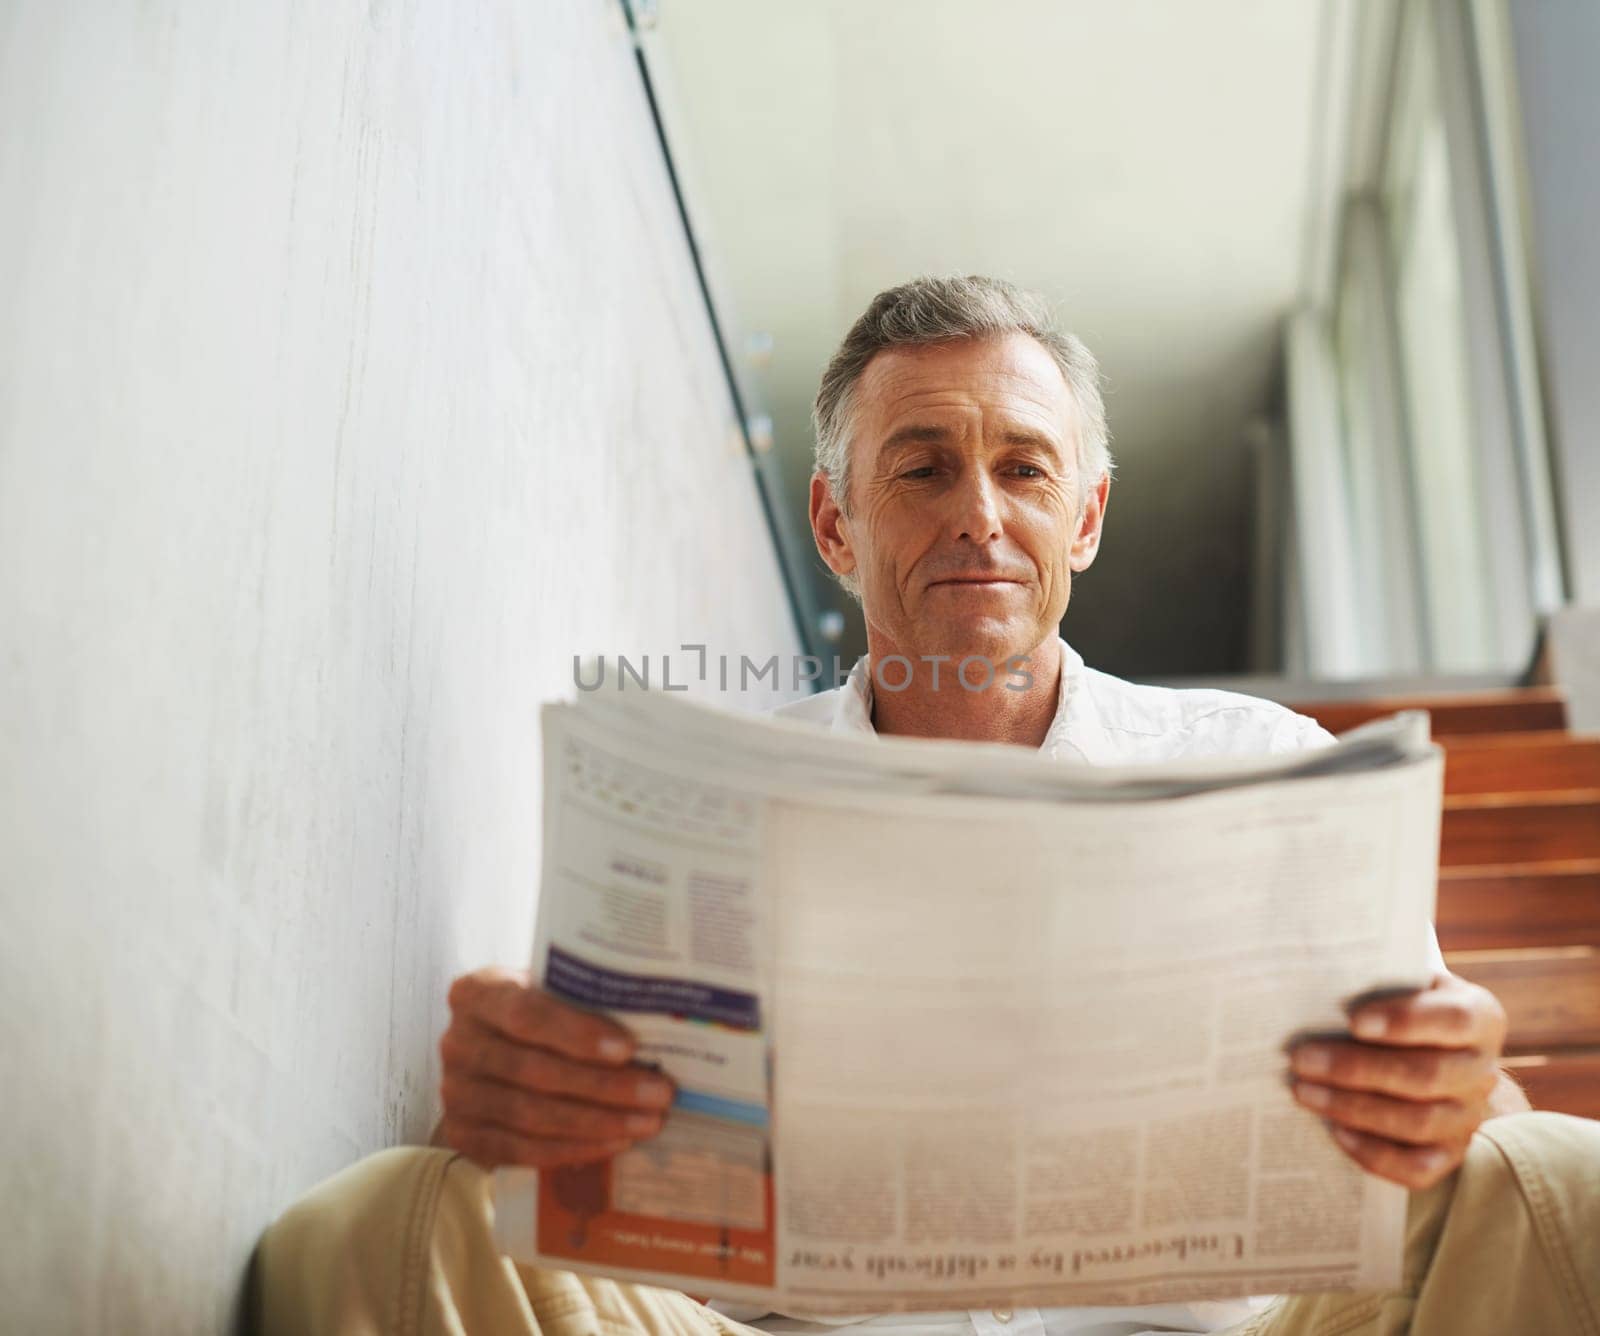 Mature, man and newspaper reading in office for stock market review for news article, journalist or investment. Male person, face and business section on stairs with global financial, report or press.